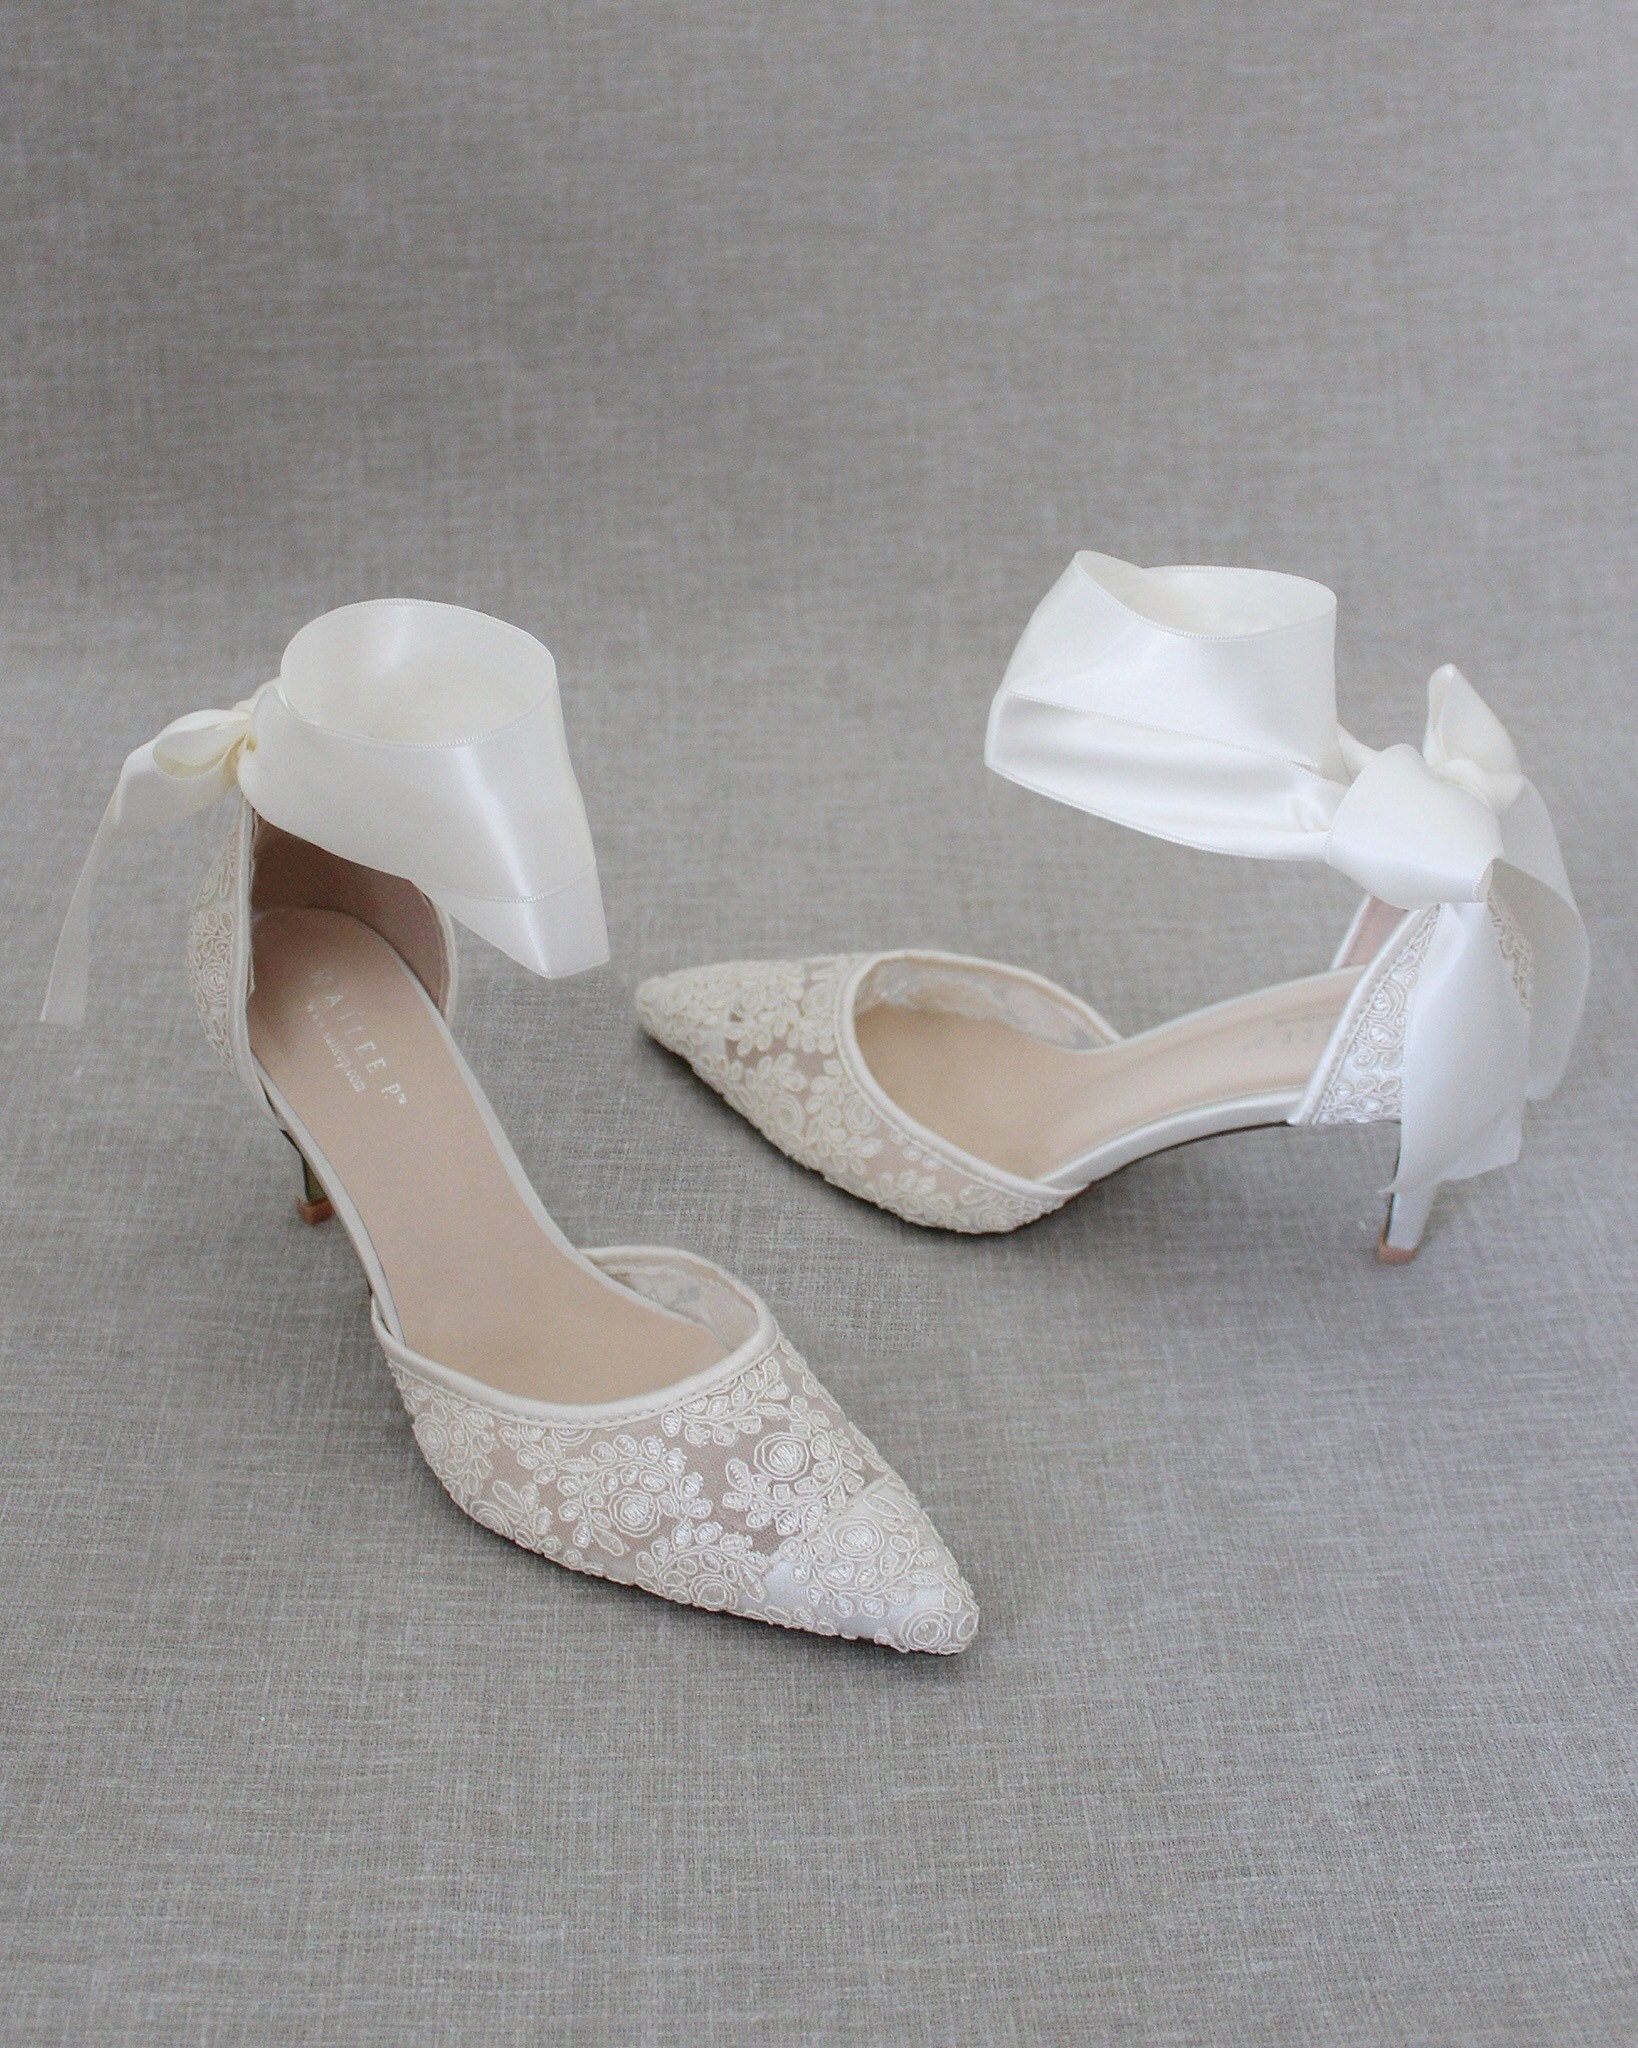 Ivory Crochet Lace Pointy Toe Heels With WRAPPED SATIN TIE - Etsy